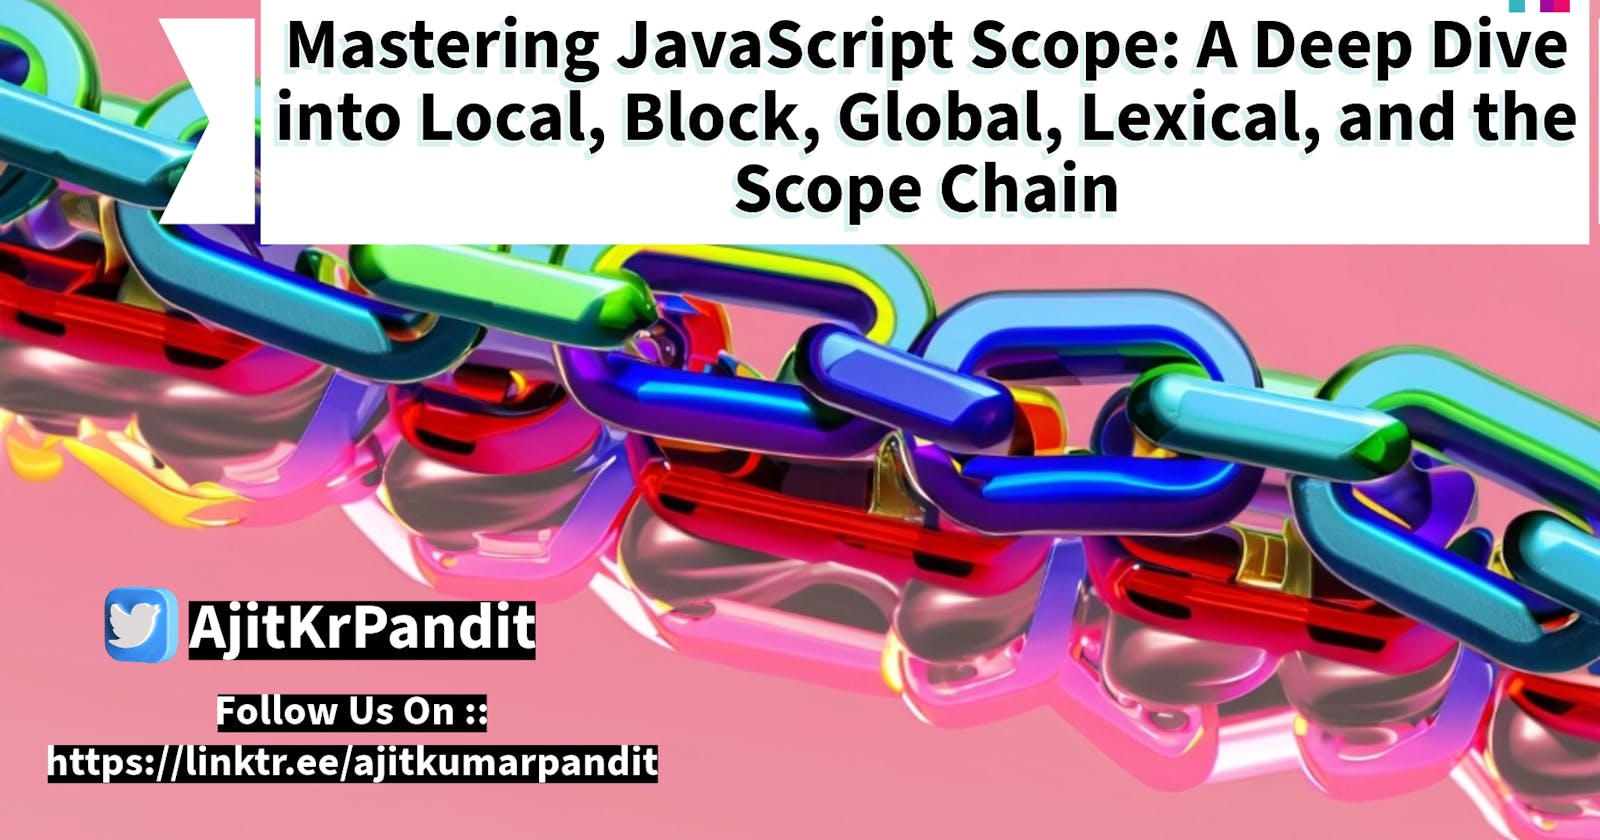 Mastering JavaScript Scope: A Deep Dive into Local, Block, Global, Lexical, and the Scope Chain